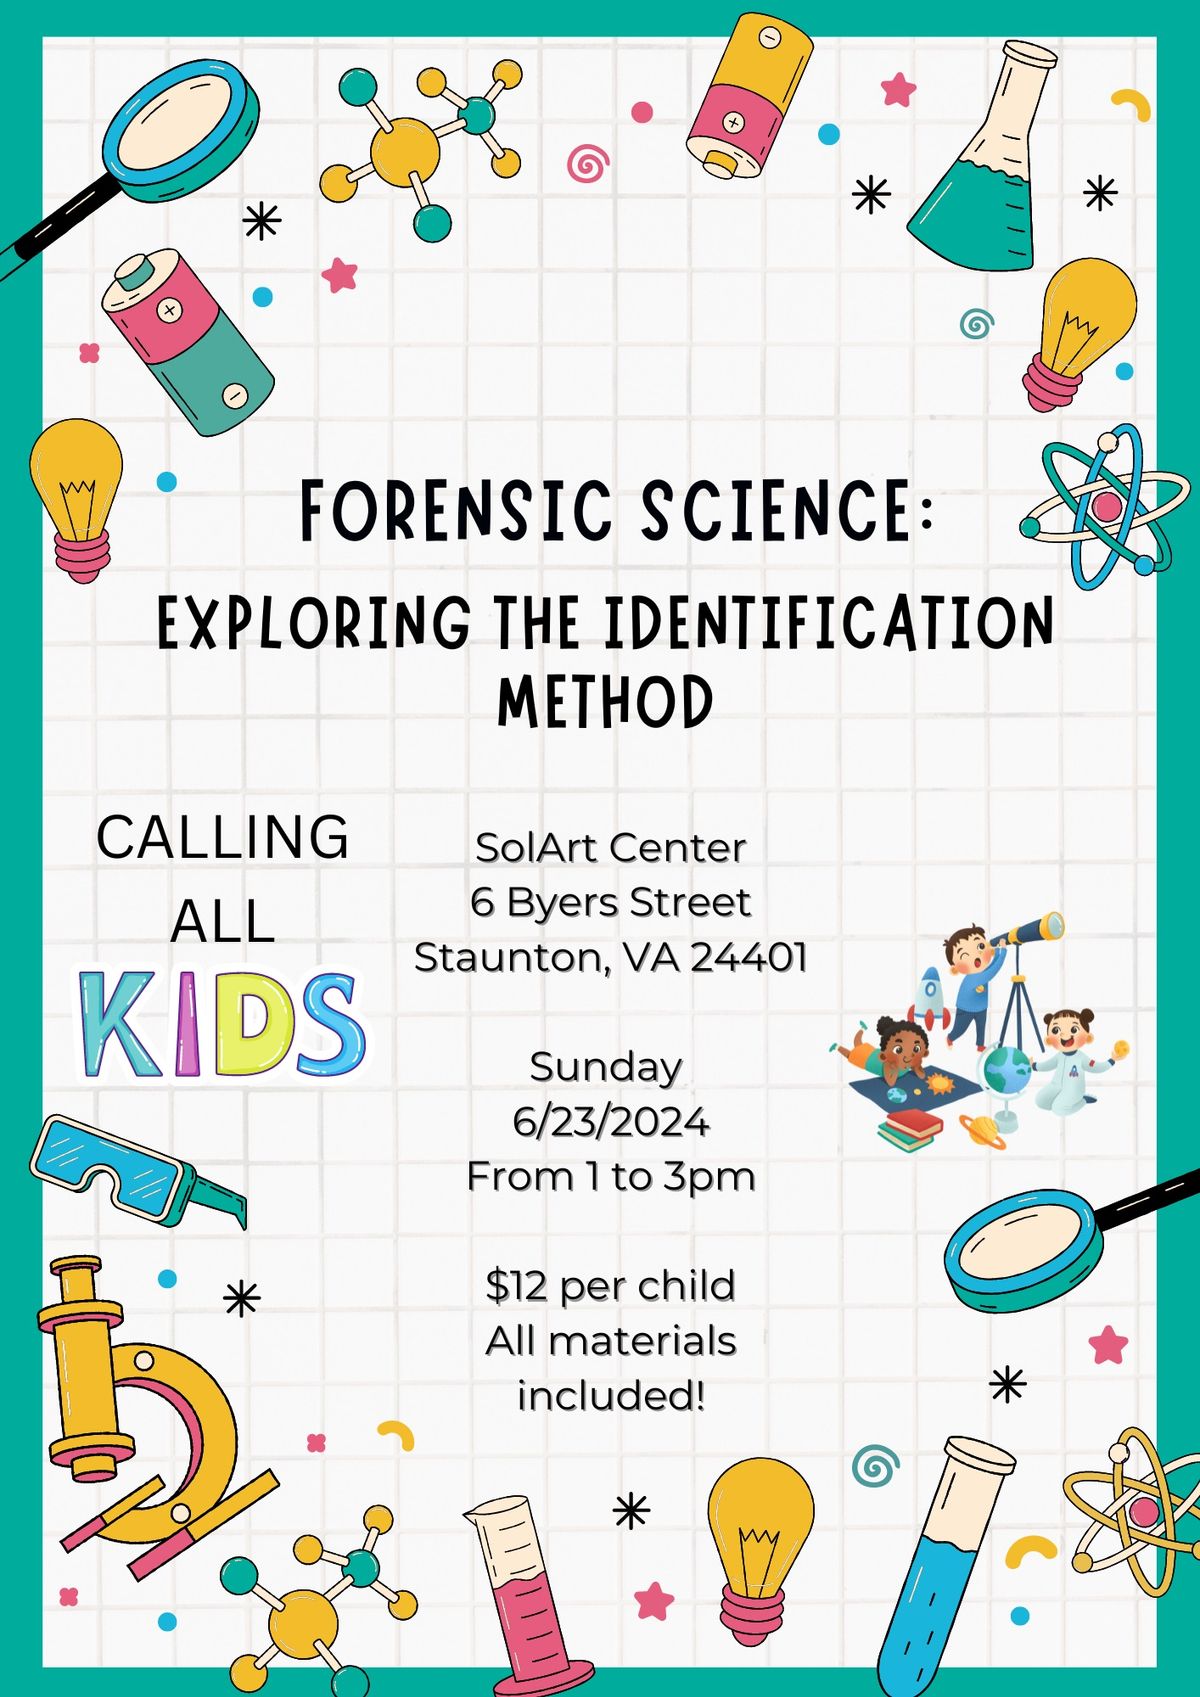 Forensic Science: Exploring the Identification Method